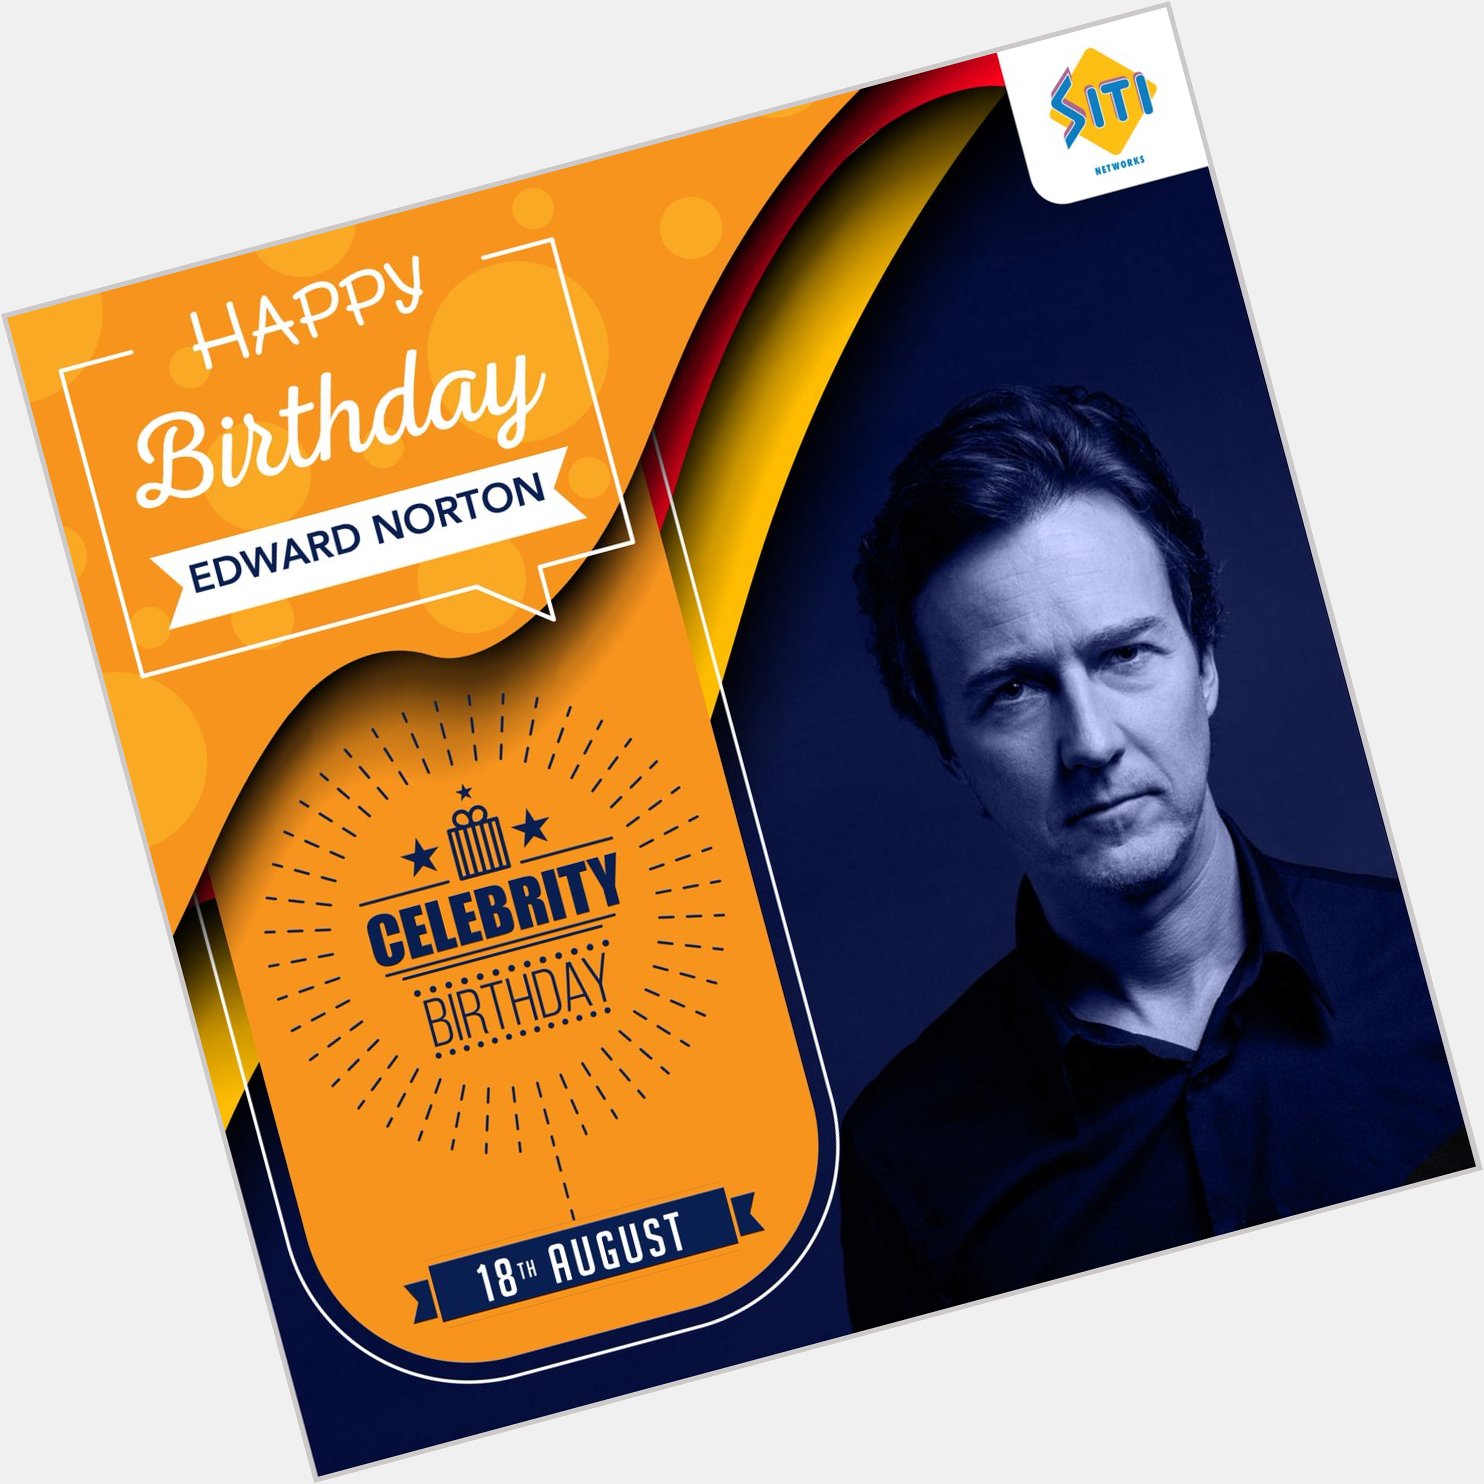 SITI wishes to the 3-time Oscar Nominee, Edward Norton, a very Happy Birthday. 